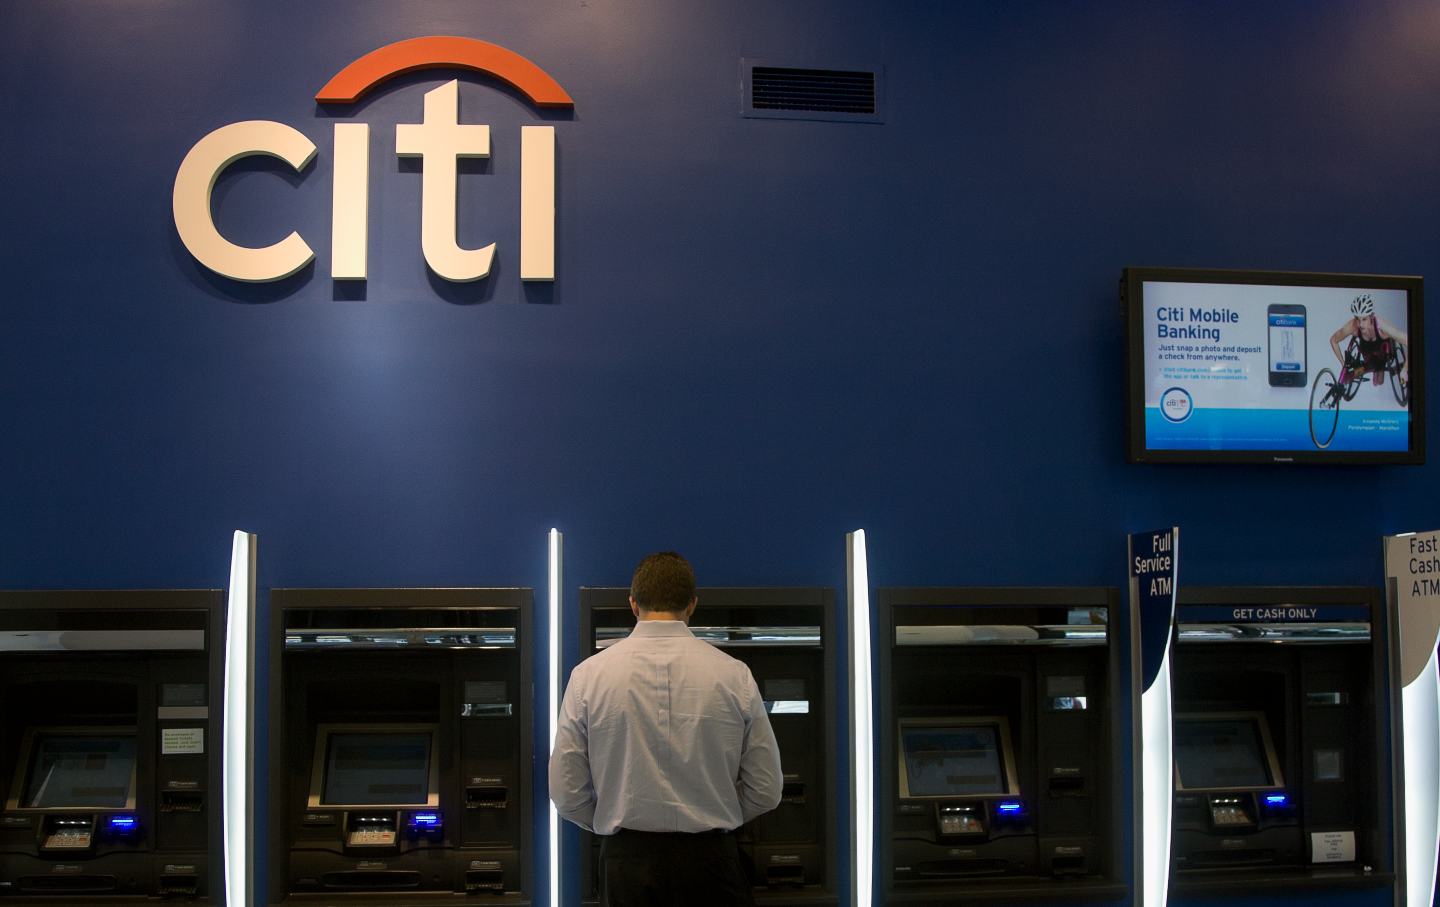 A man does a banking transaction at a Citibank ATM fast cash machine.